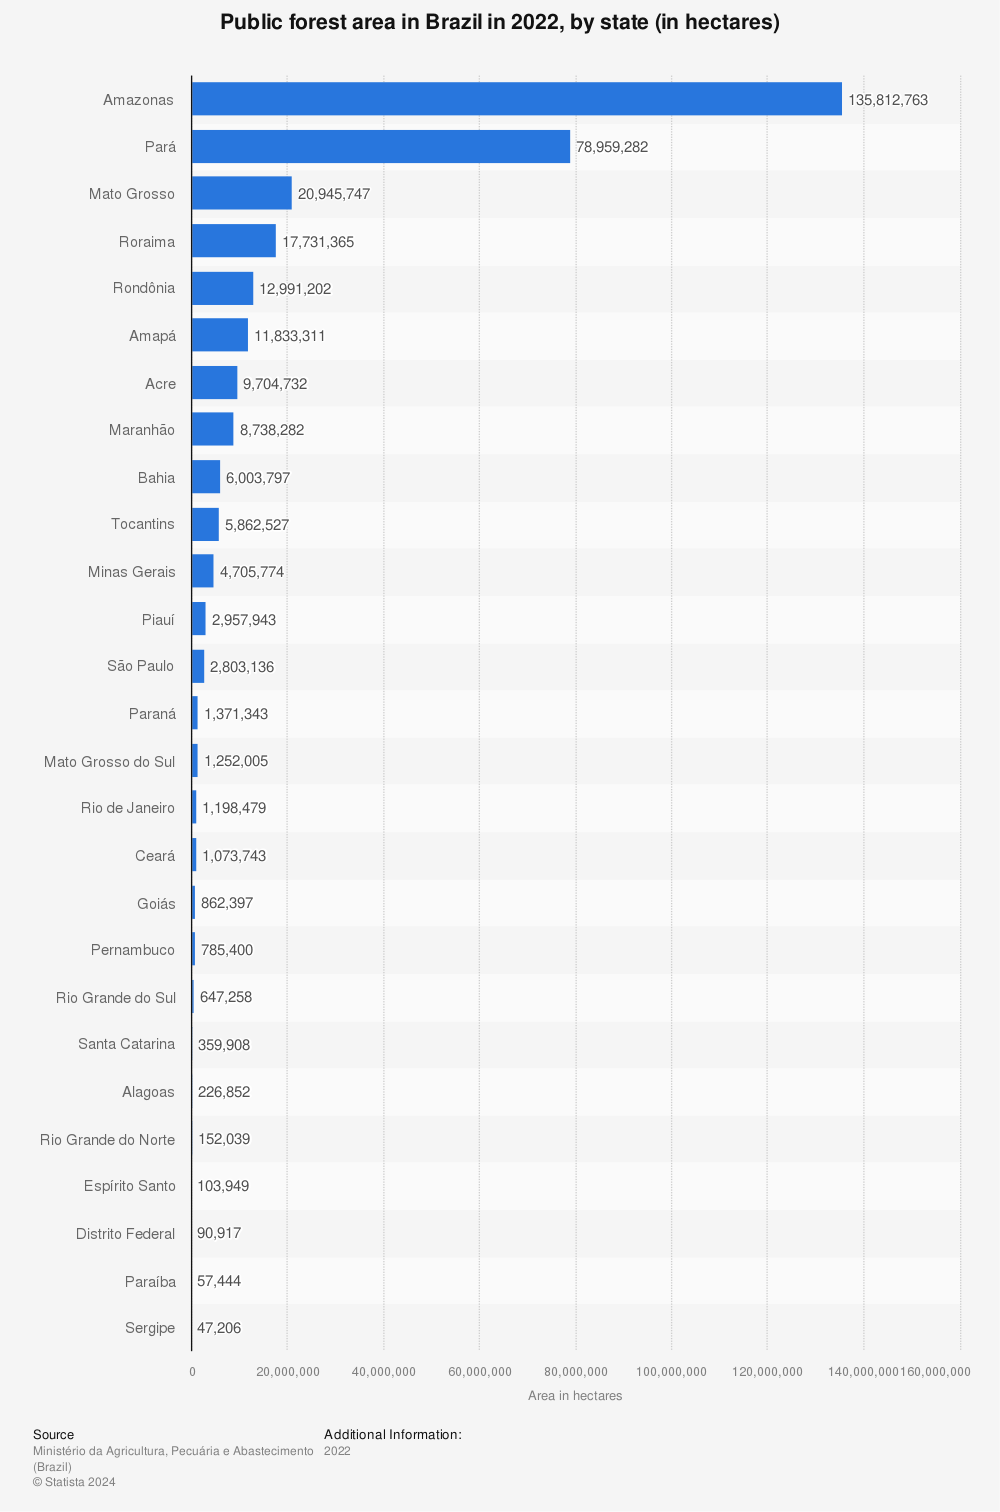 Statistic: Public forest area in Brazil in 2020, by state (in 1,000 hectares) | Statista